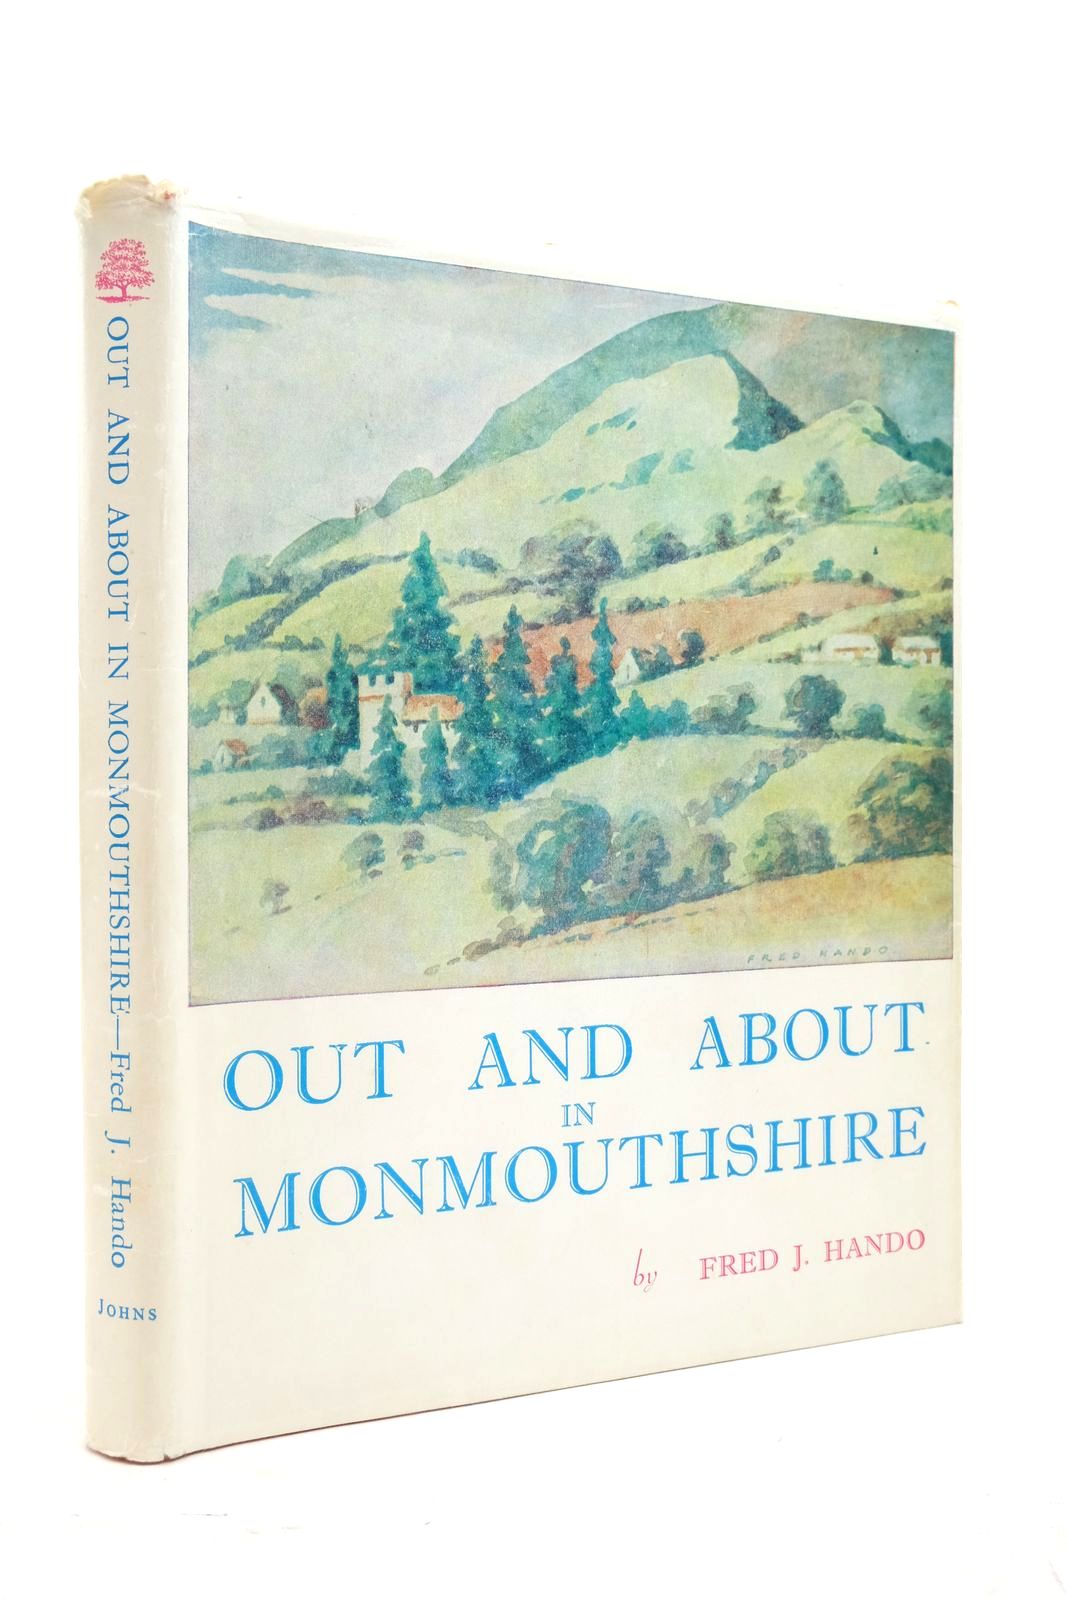 Photo of OUT AND ABOUT IN MONMOUTHSHIRE written by Hando, Fred J. illustrated by Hando, Fred J. published by R.H. Johns Limited (STOCK CODE: 2137673)  for sale by Stella & Rose's Books